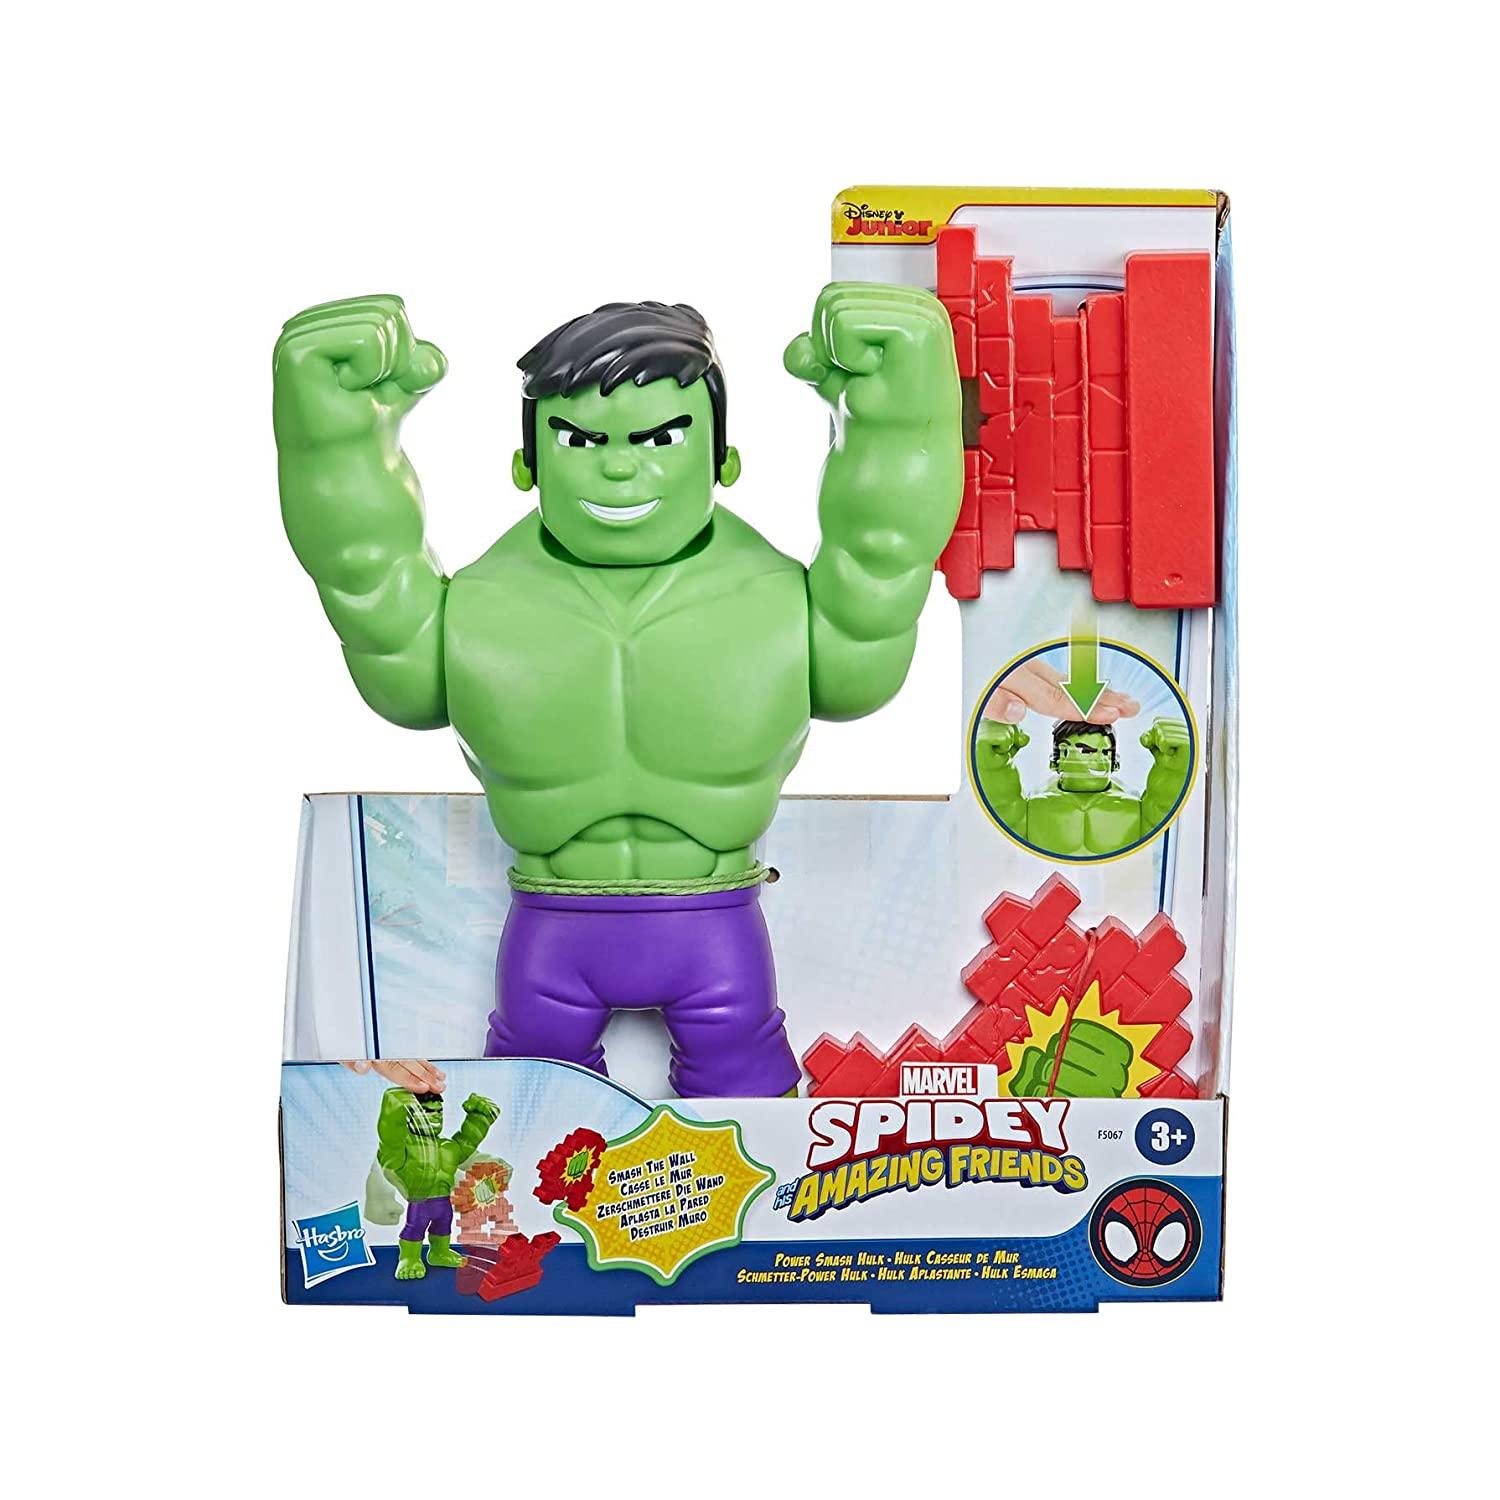 Green Hulk Stock Photos and Pictures - 1,329 Images